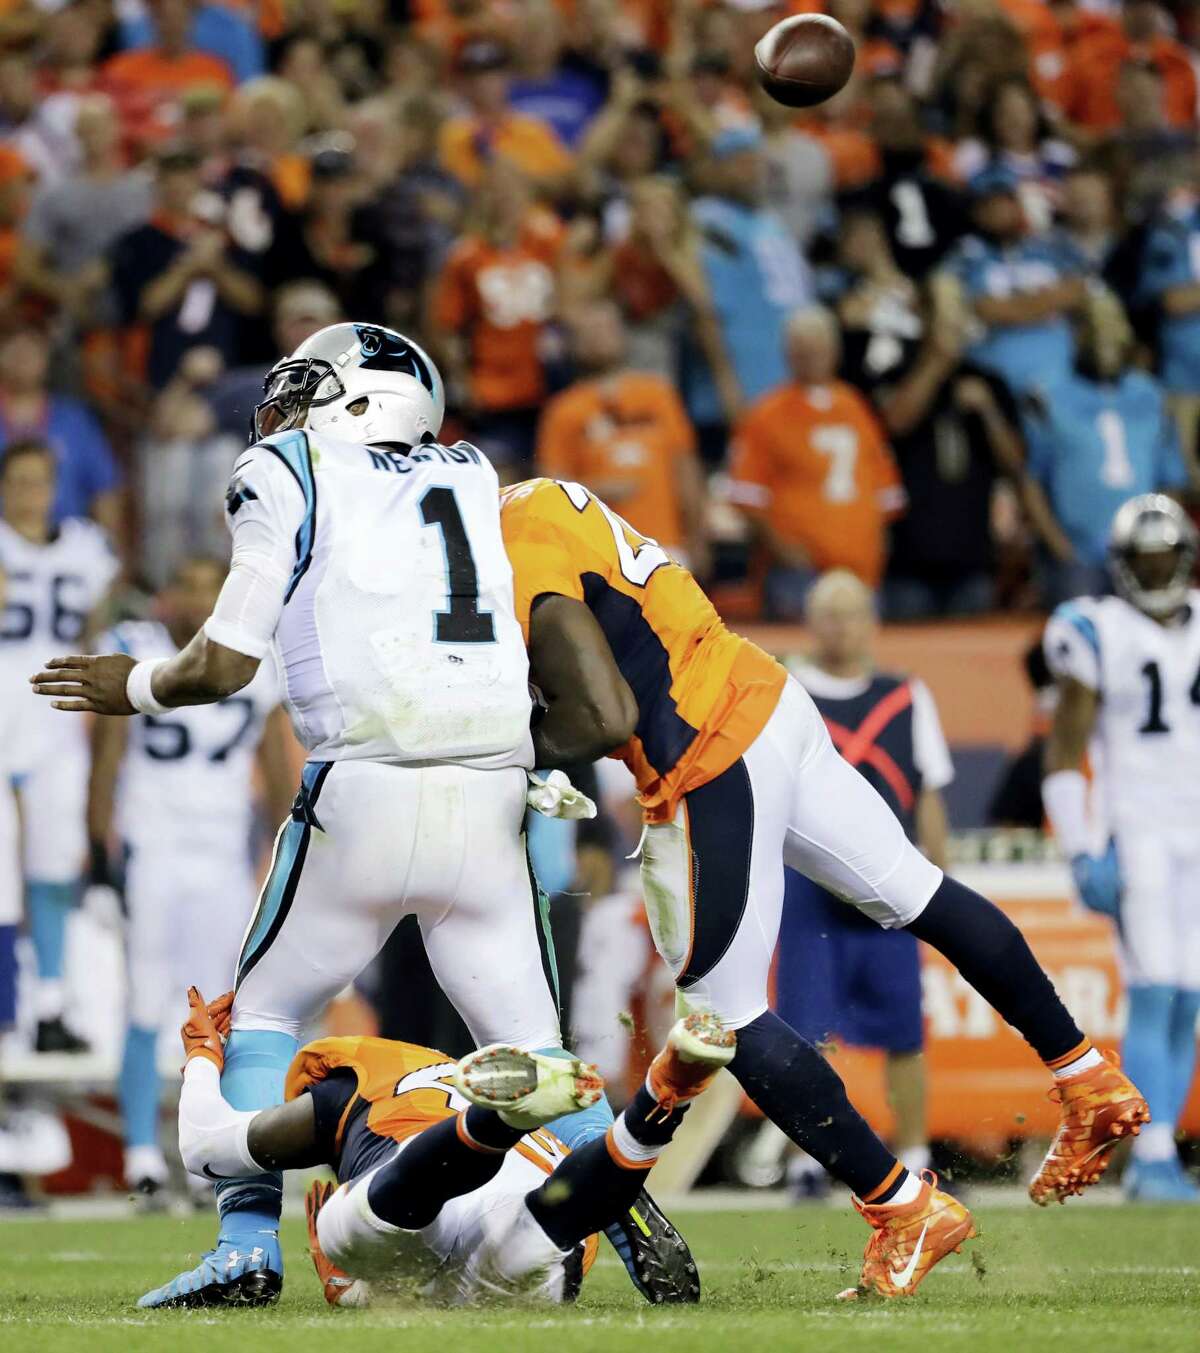 In this Sept. 8, 2016 photo, Denver Broncos free safety Darian Stewart (26) hits Carolina Panthers quarterback Cam Newton (1) late for a penalty during the second half of an NFL football game in Denver.